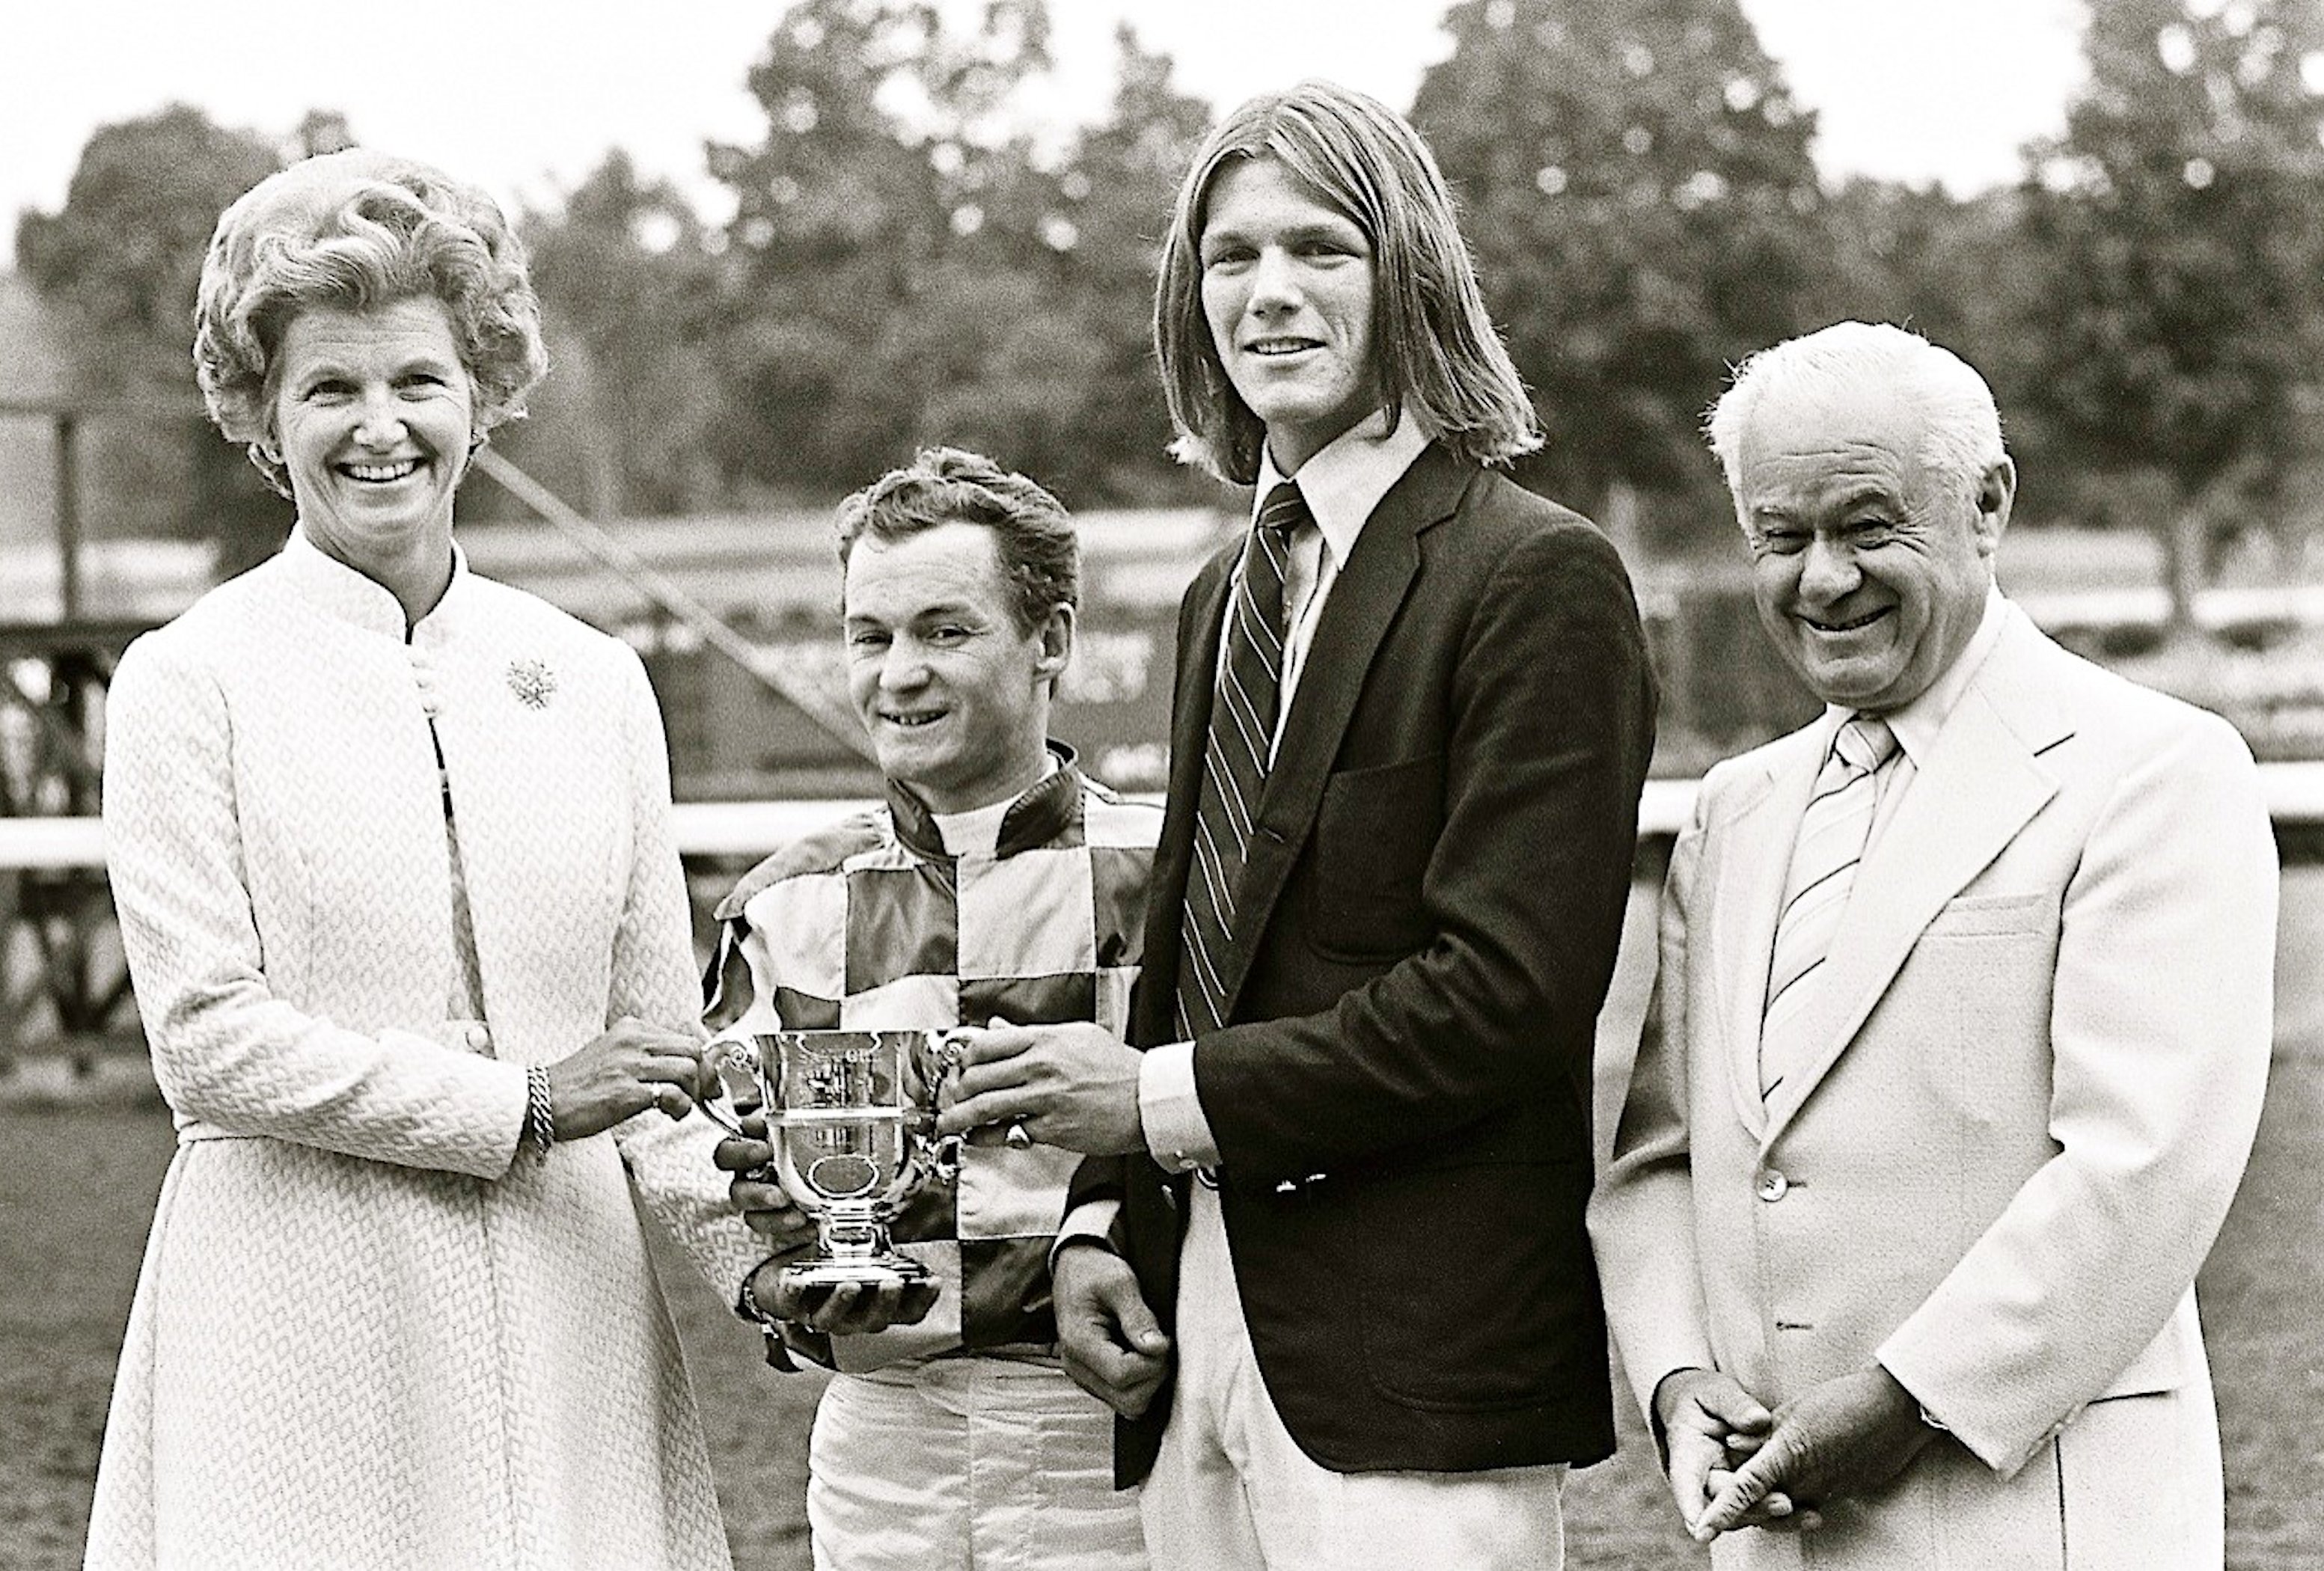 Penny Chenery, left, celebrates with Ron Turcotte, Peter Sanford Wood, and Lucien Laurin, after Secretariat's victory in the 1972 Sanford Stakes at Saratoga (Douglas Lees)